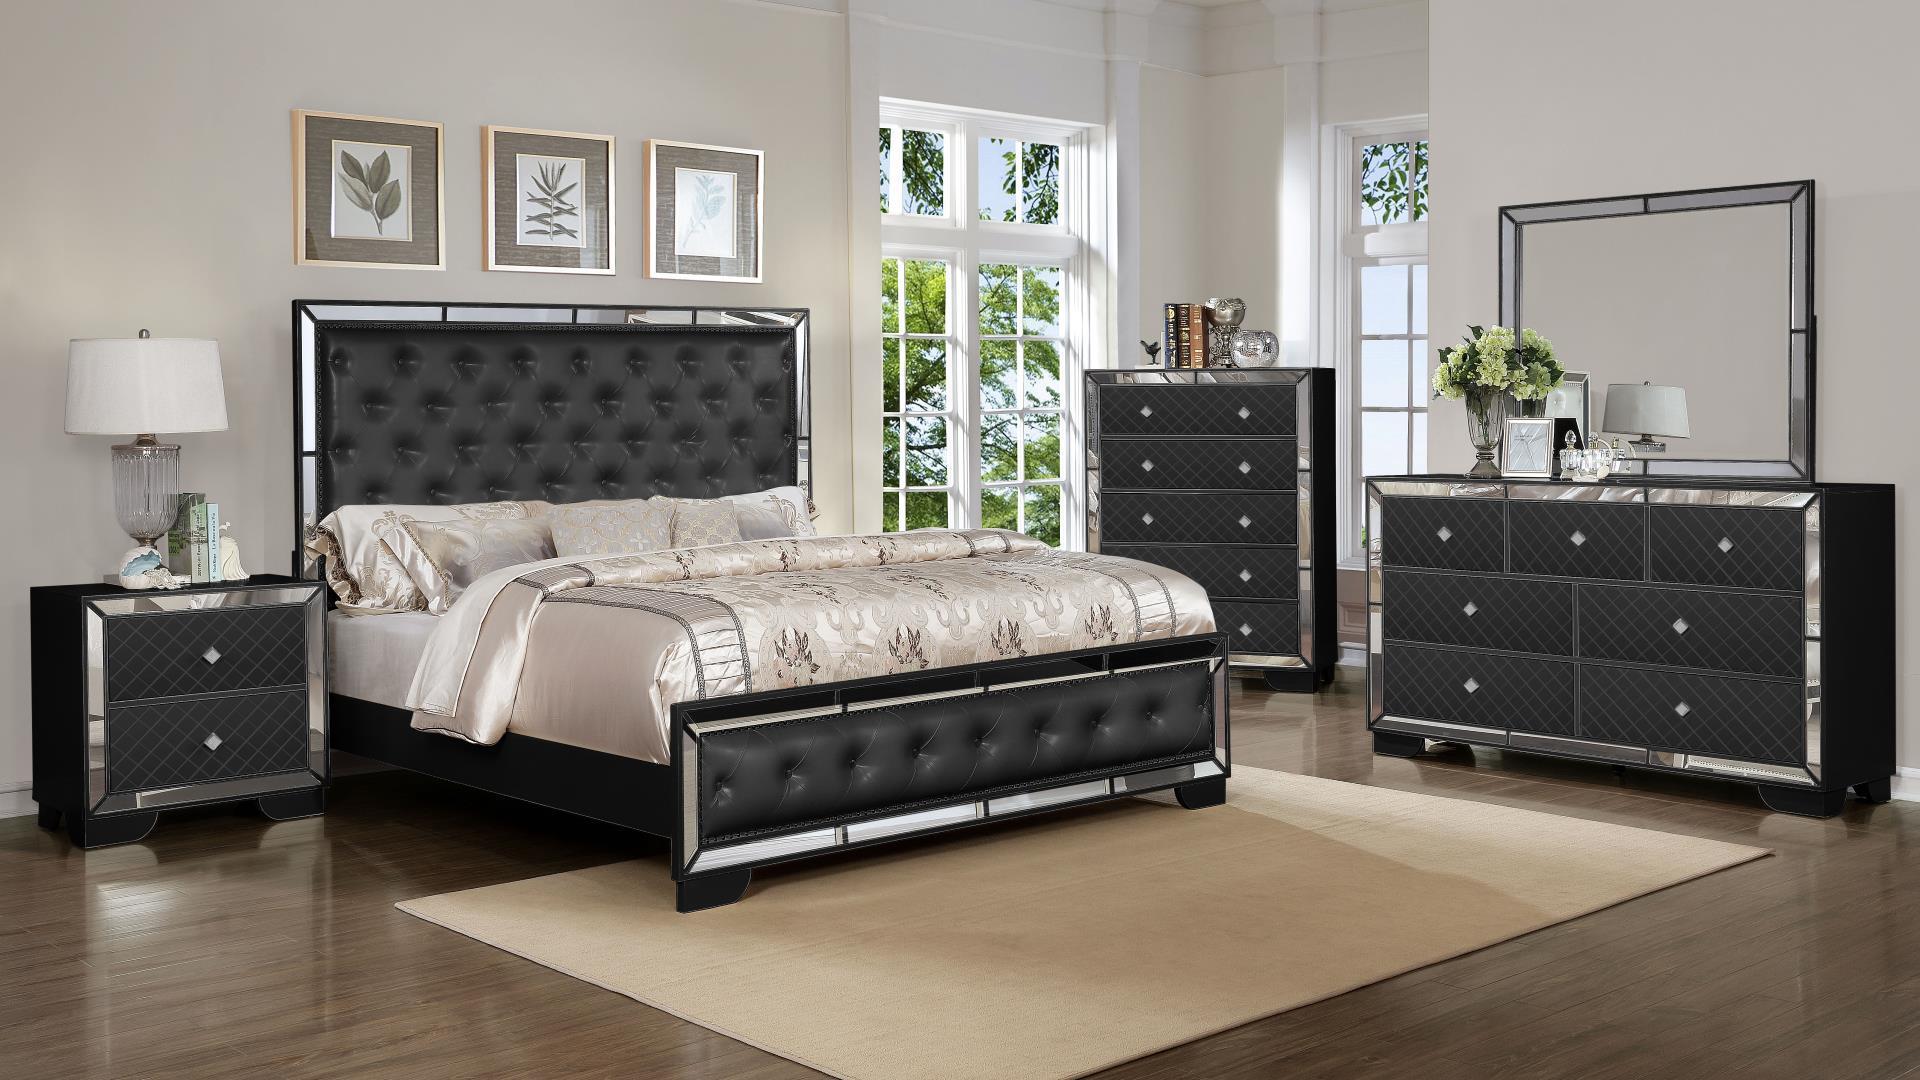 

    
Glam Black Mirrored Inlay Tufted Queen Bedroom Set 4P MADISON Galaxy Home Modern
